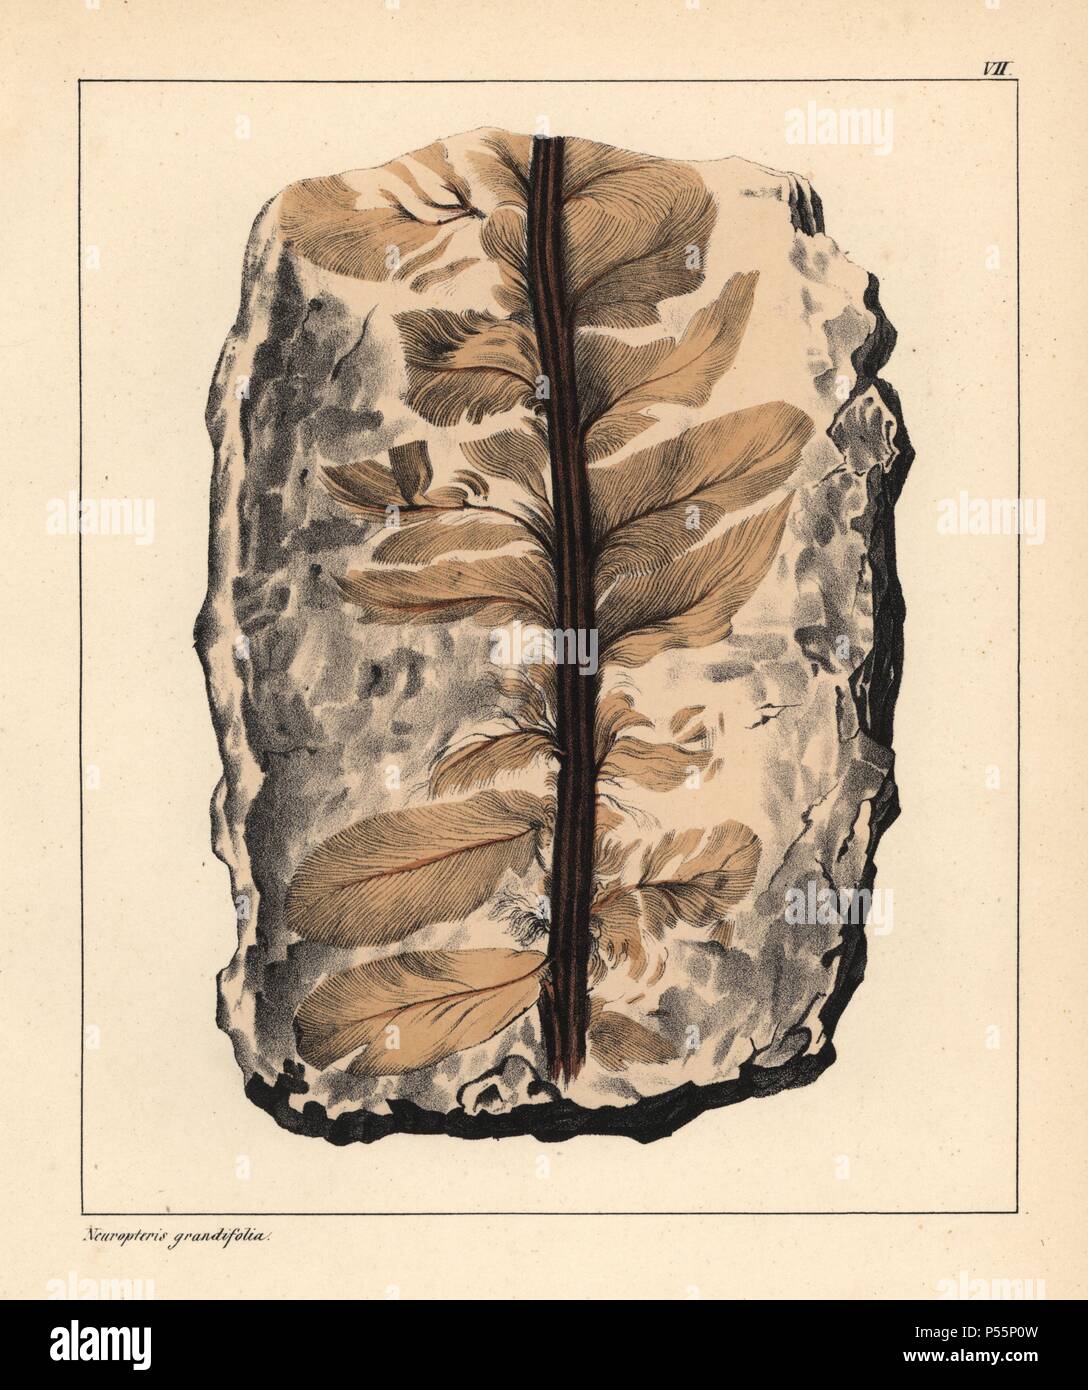 Fossil of Neuropteris grandiflora, an extinct seed fern from the Carboniferous period. Handcoloured lithograph by an unknown artist from Dr. F.A. Schmidt's 'Petrefactenbuch,' published in Stuttgart, Germany, 1855 by Verlag von Krais & Hoffmann. Dr. Schmidt's 'Book of Petrification' introduced fossils and palaeontology to both the specialist and general reader. Stock Photo